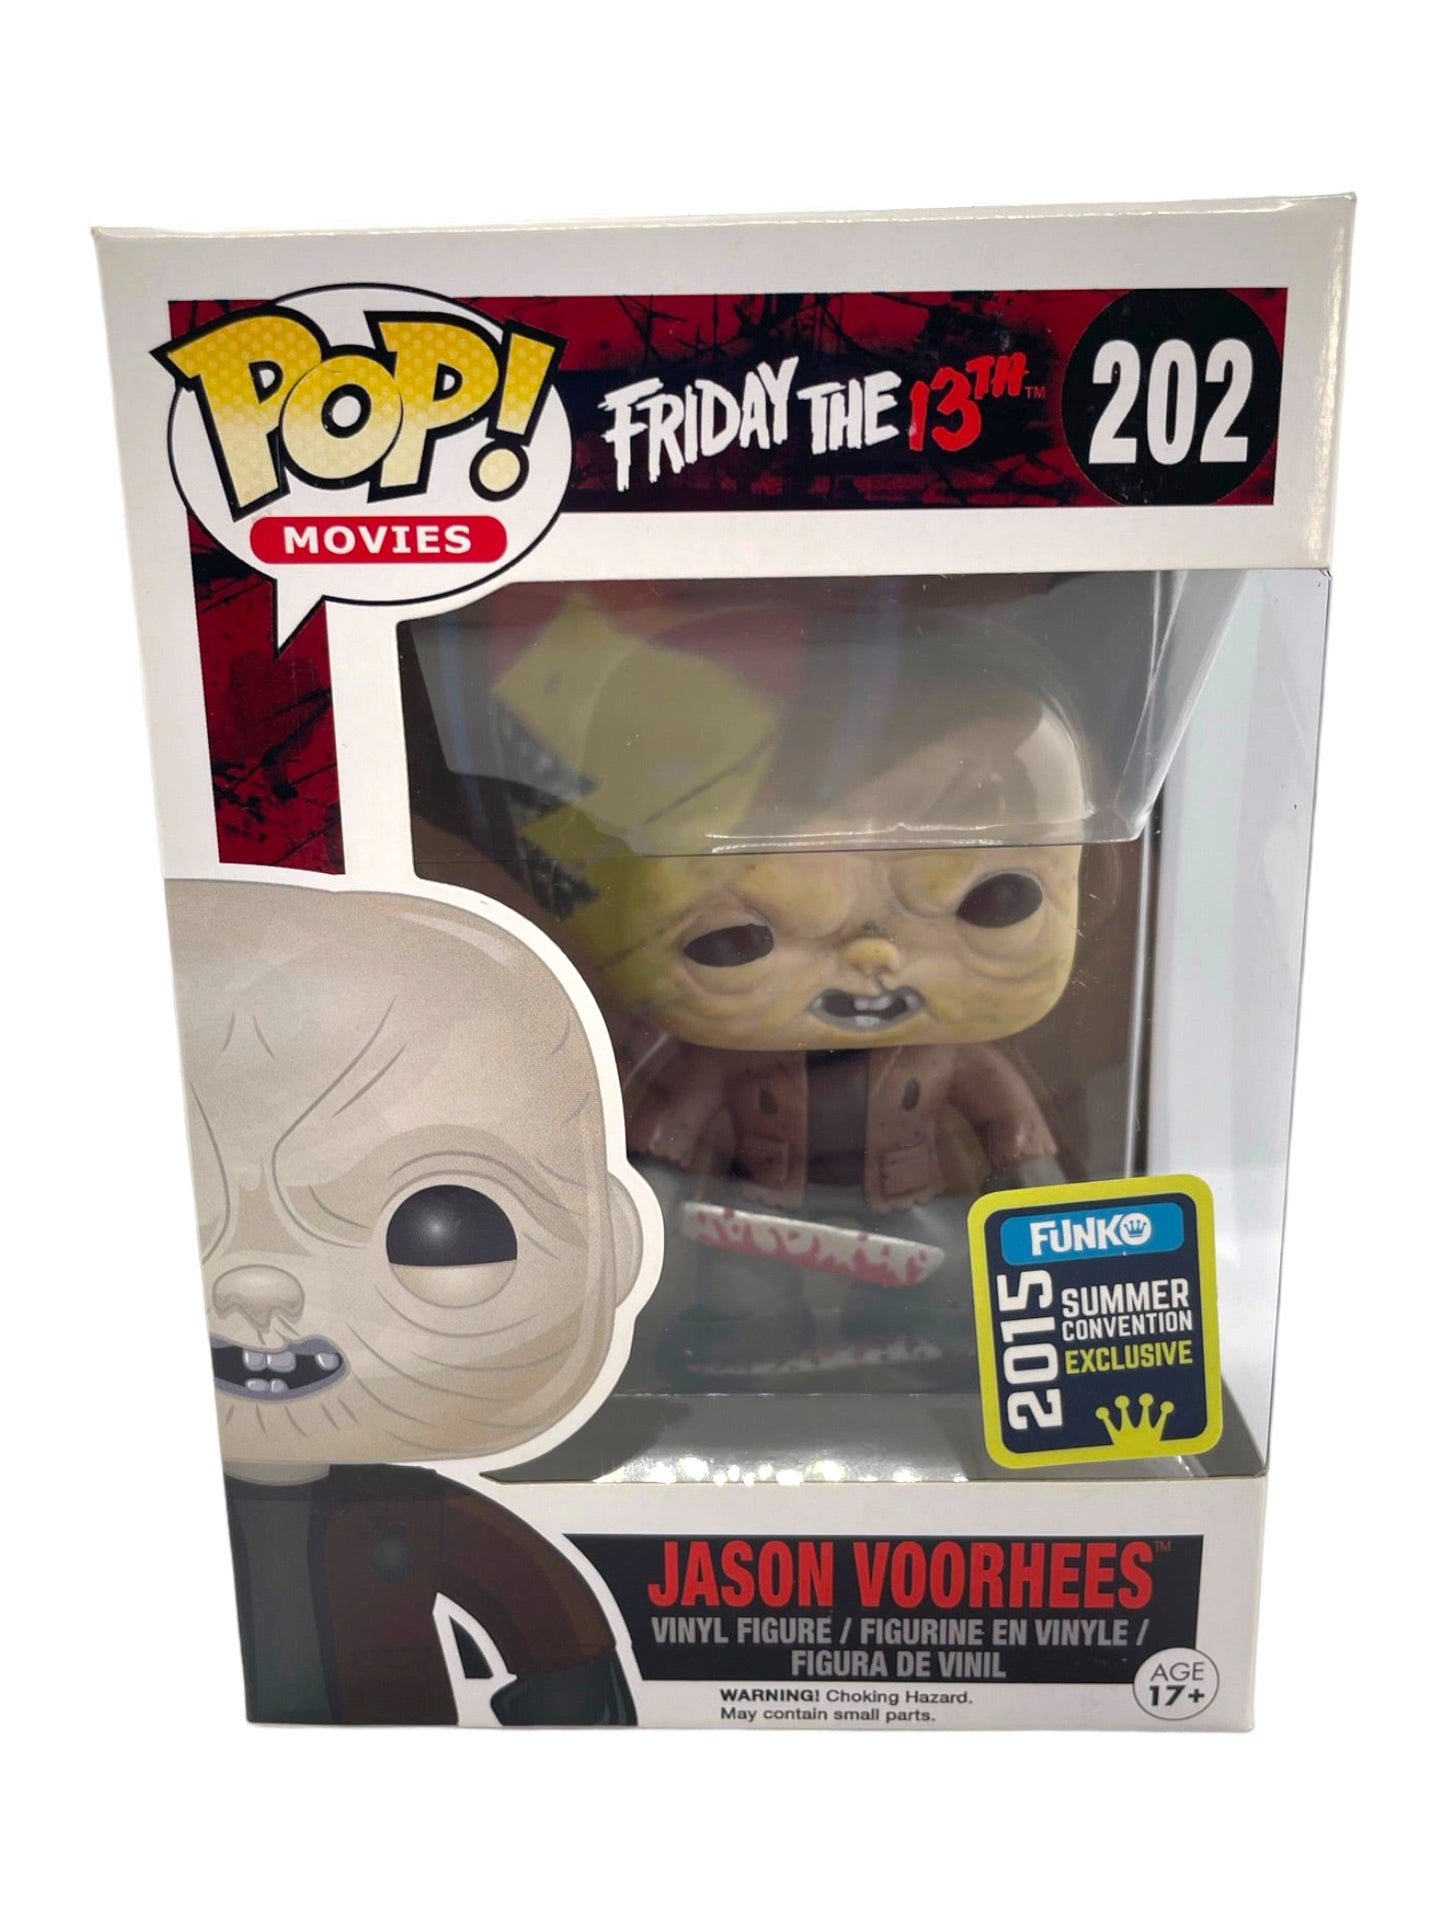 Sold 2015 Unmasked Jason Voorhees Shared Exclusive 202